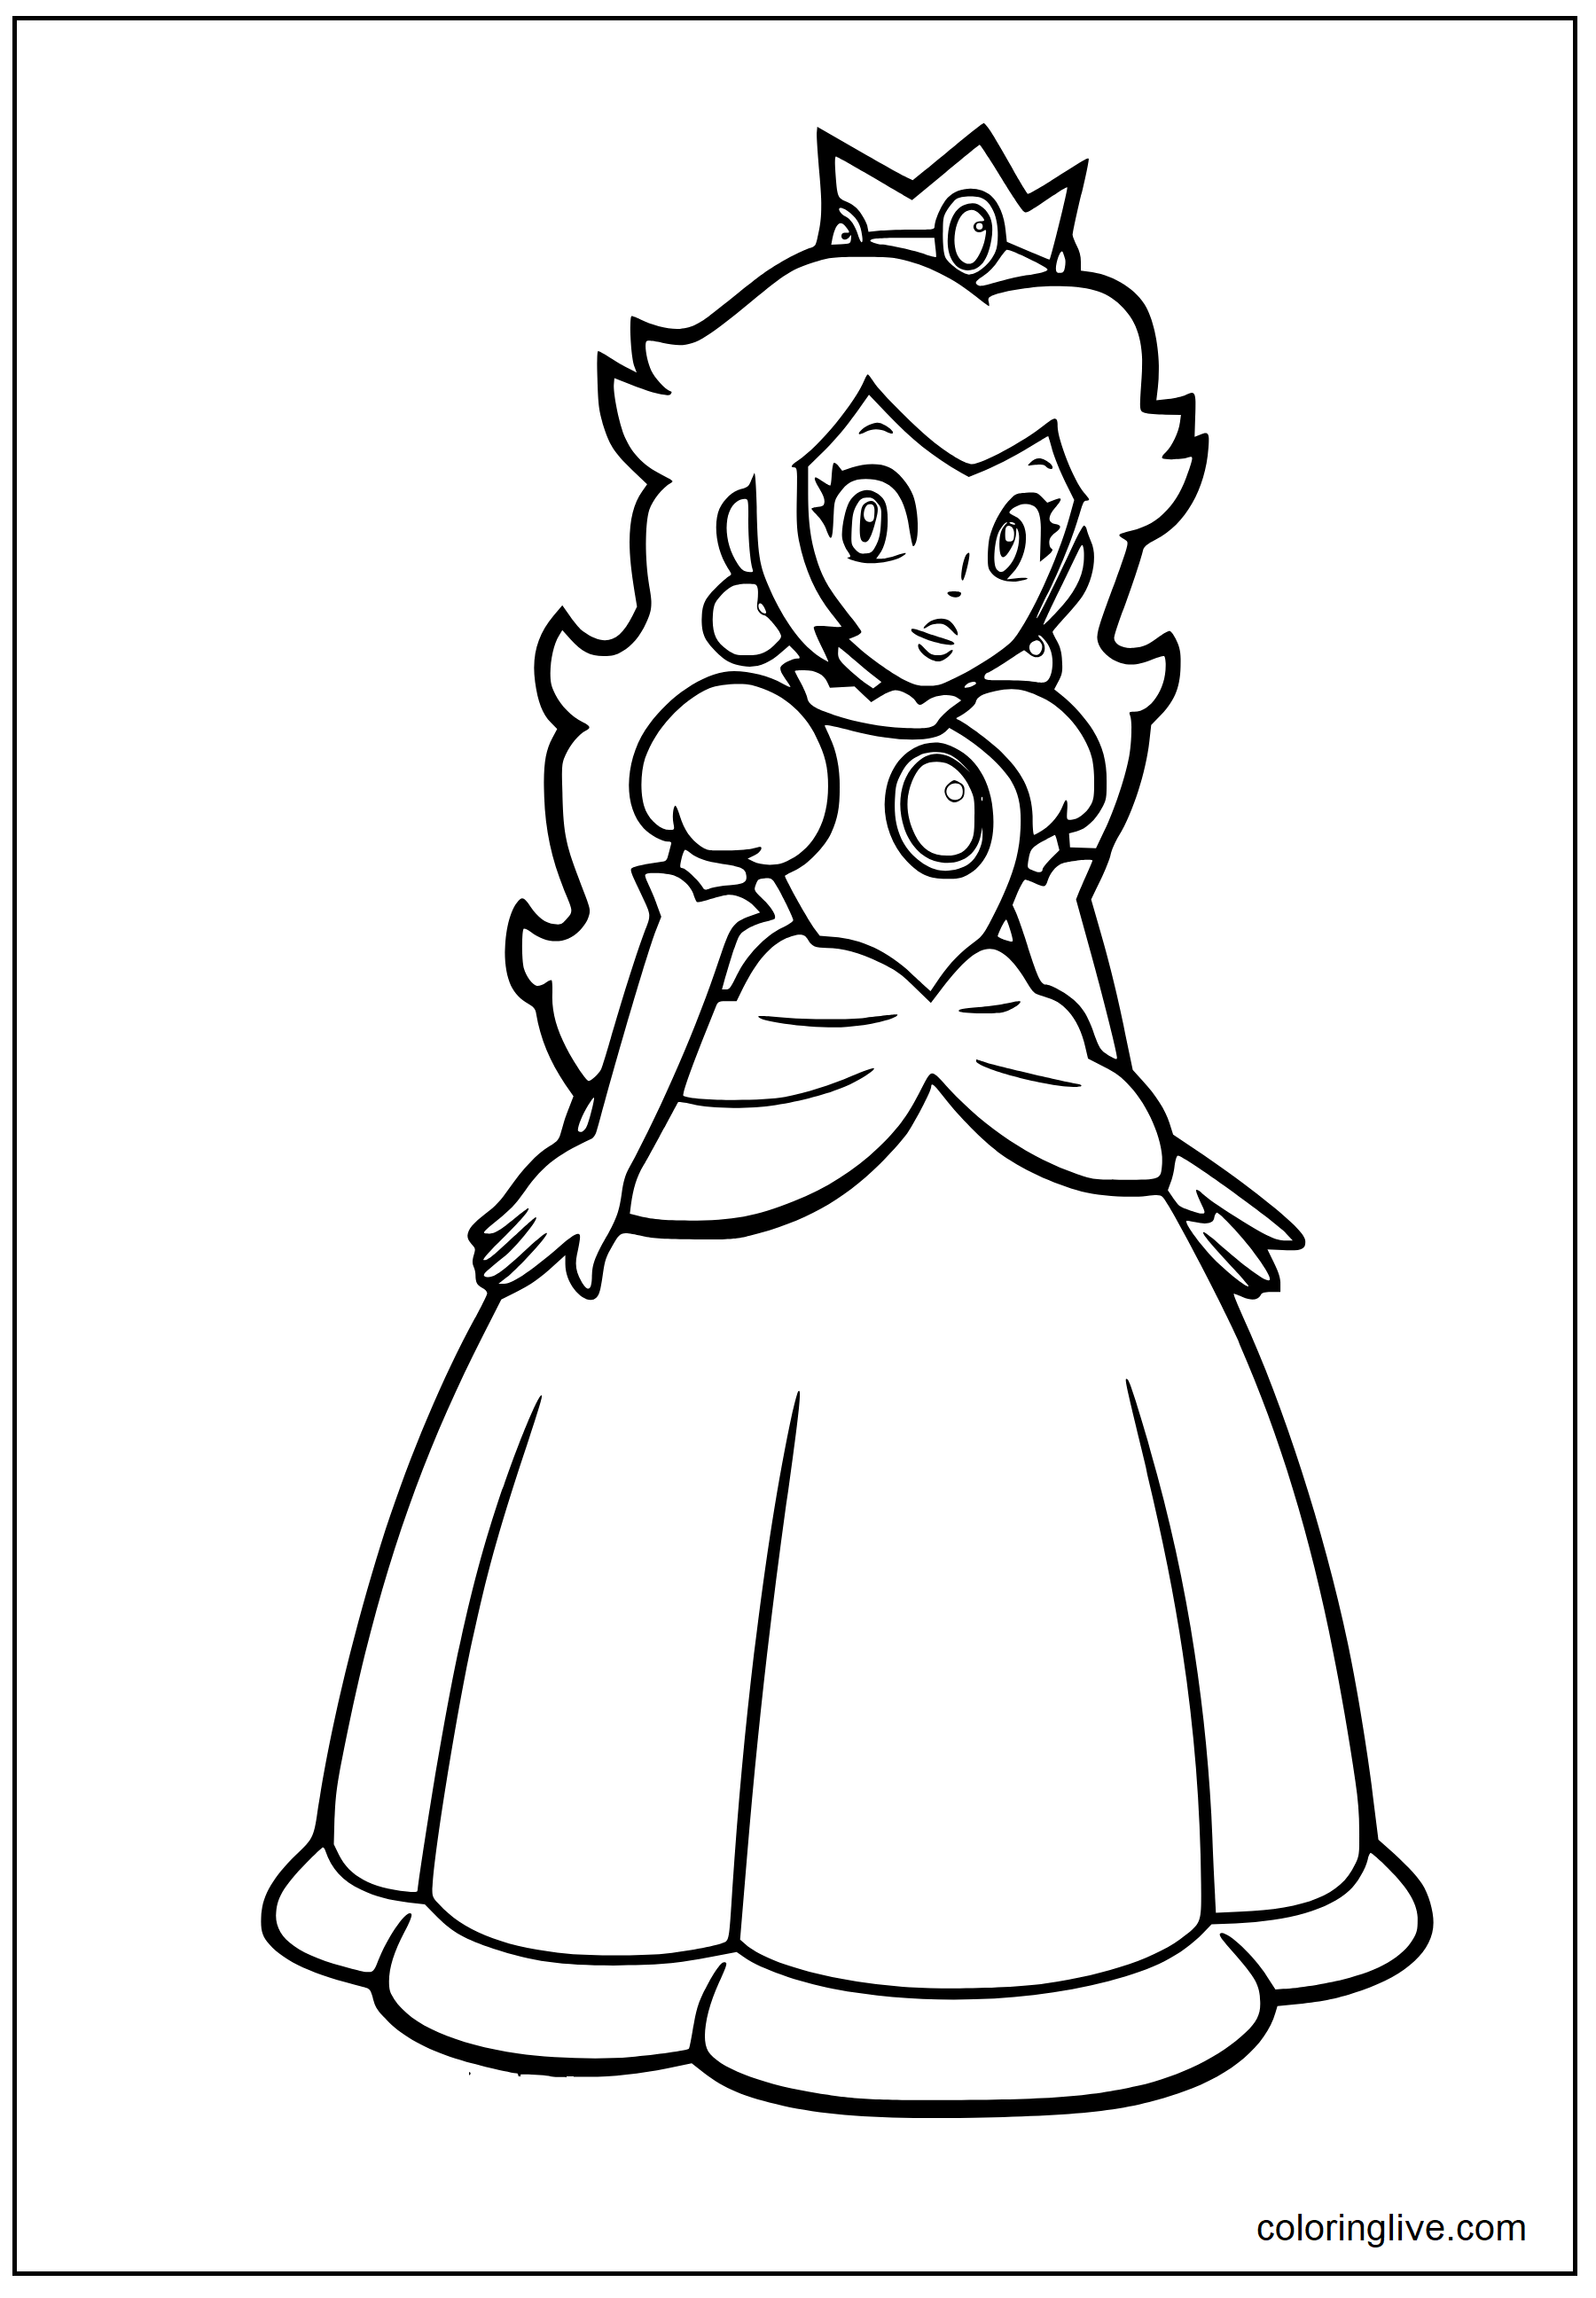 Printable Princess Peach  sheet Coloring Page for kids.